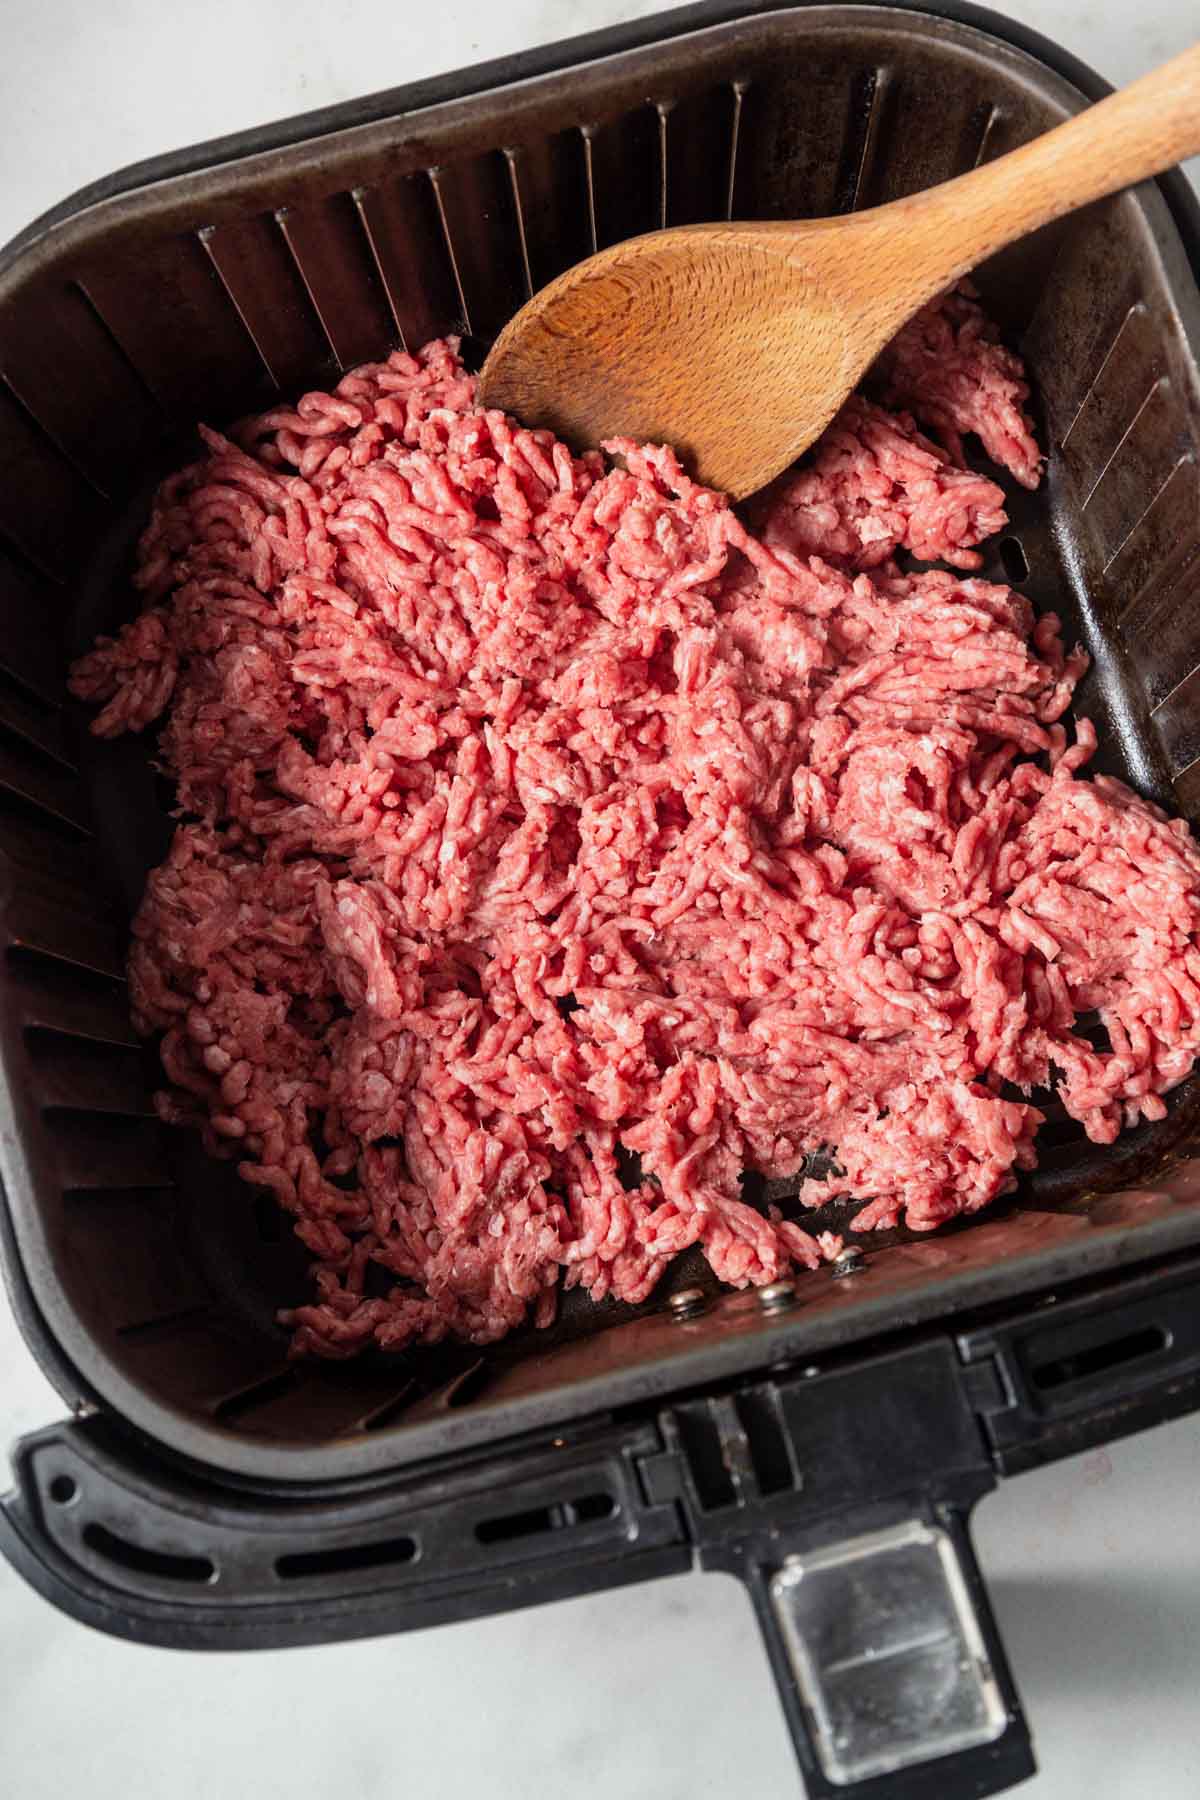 raw ground beef in the air fryer.